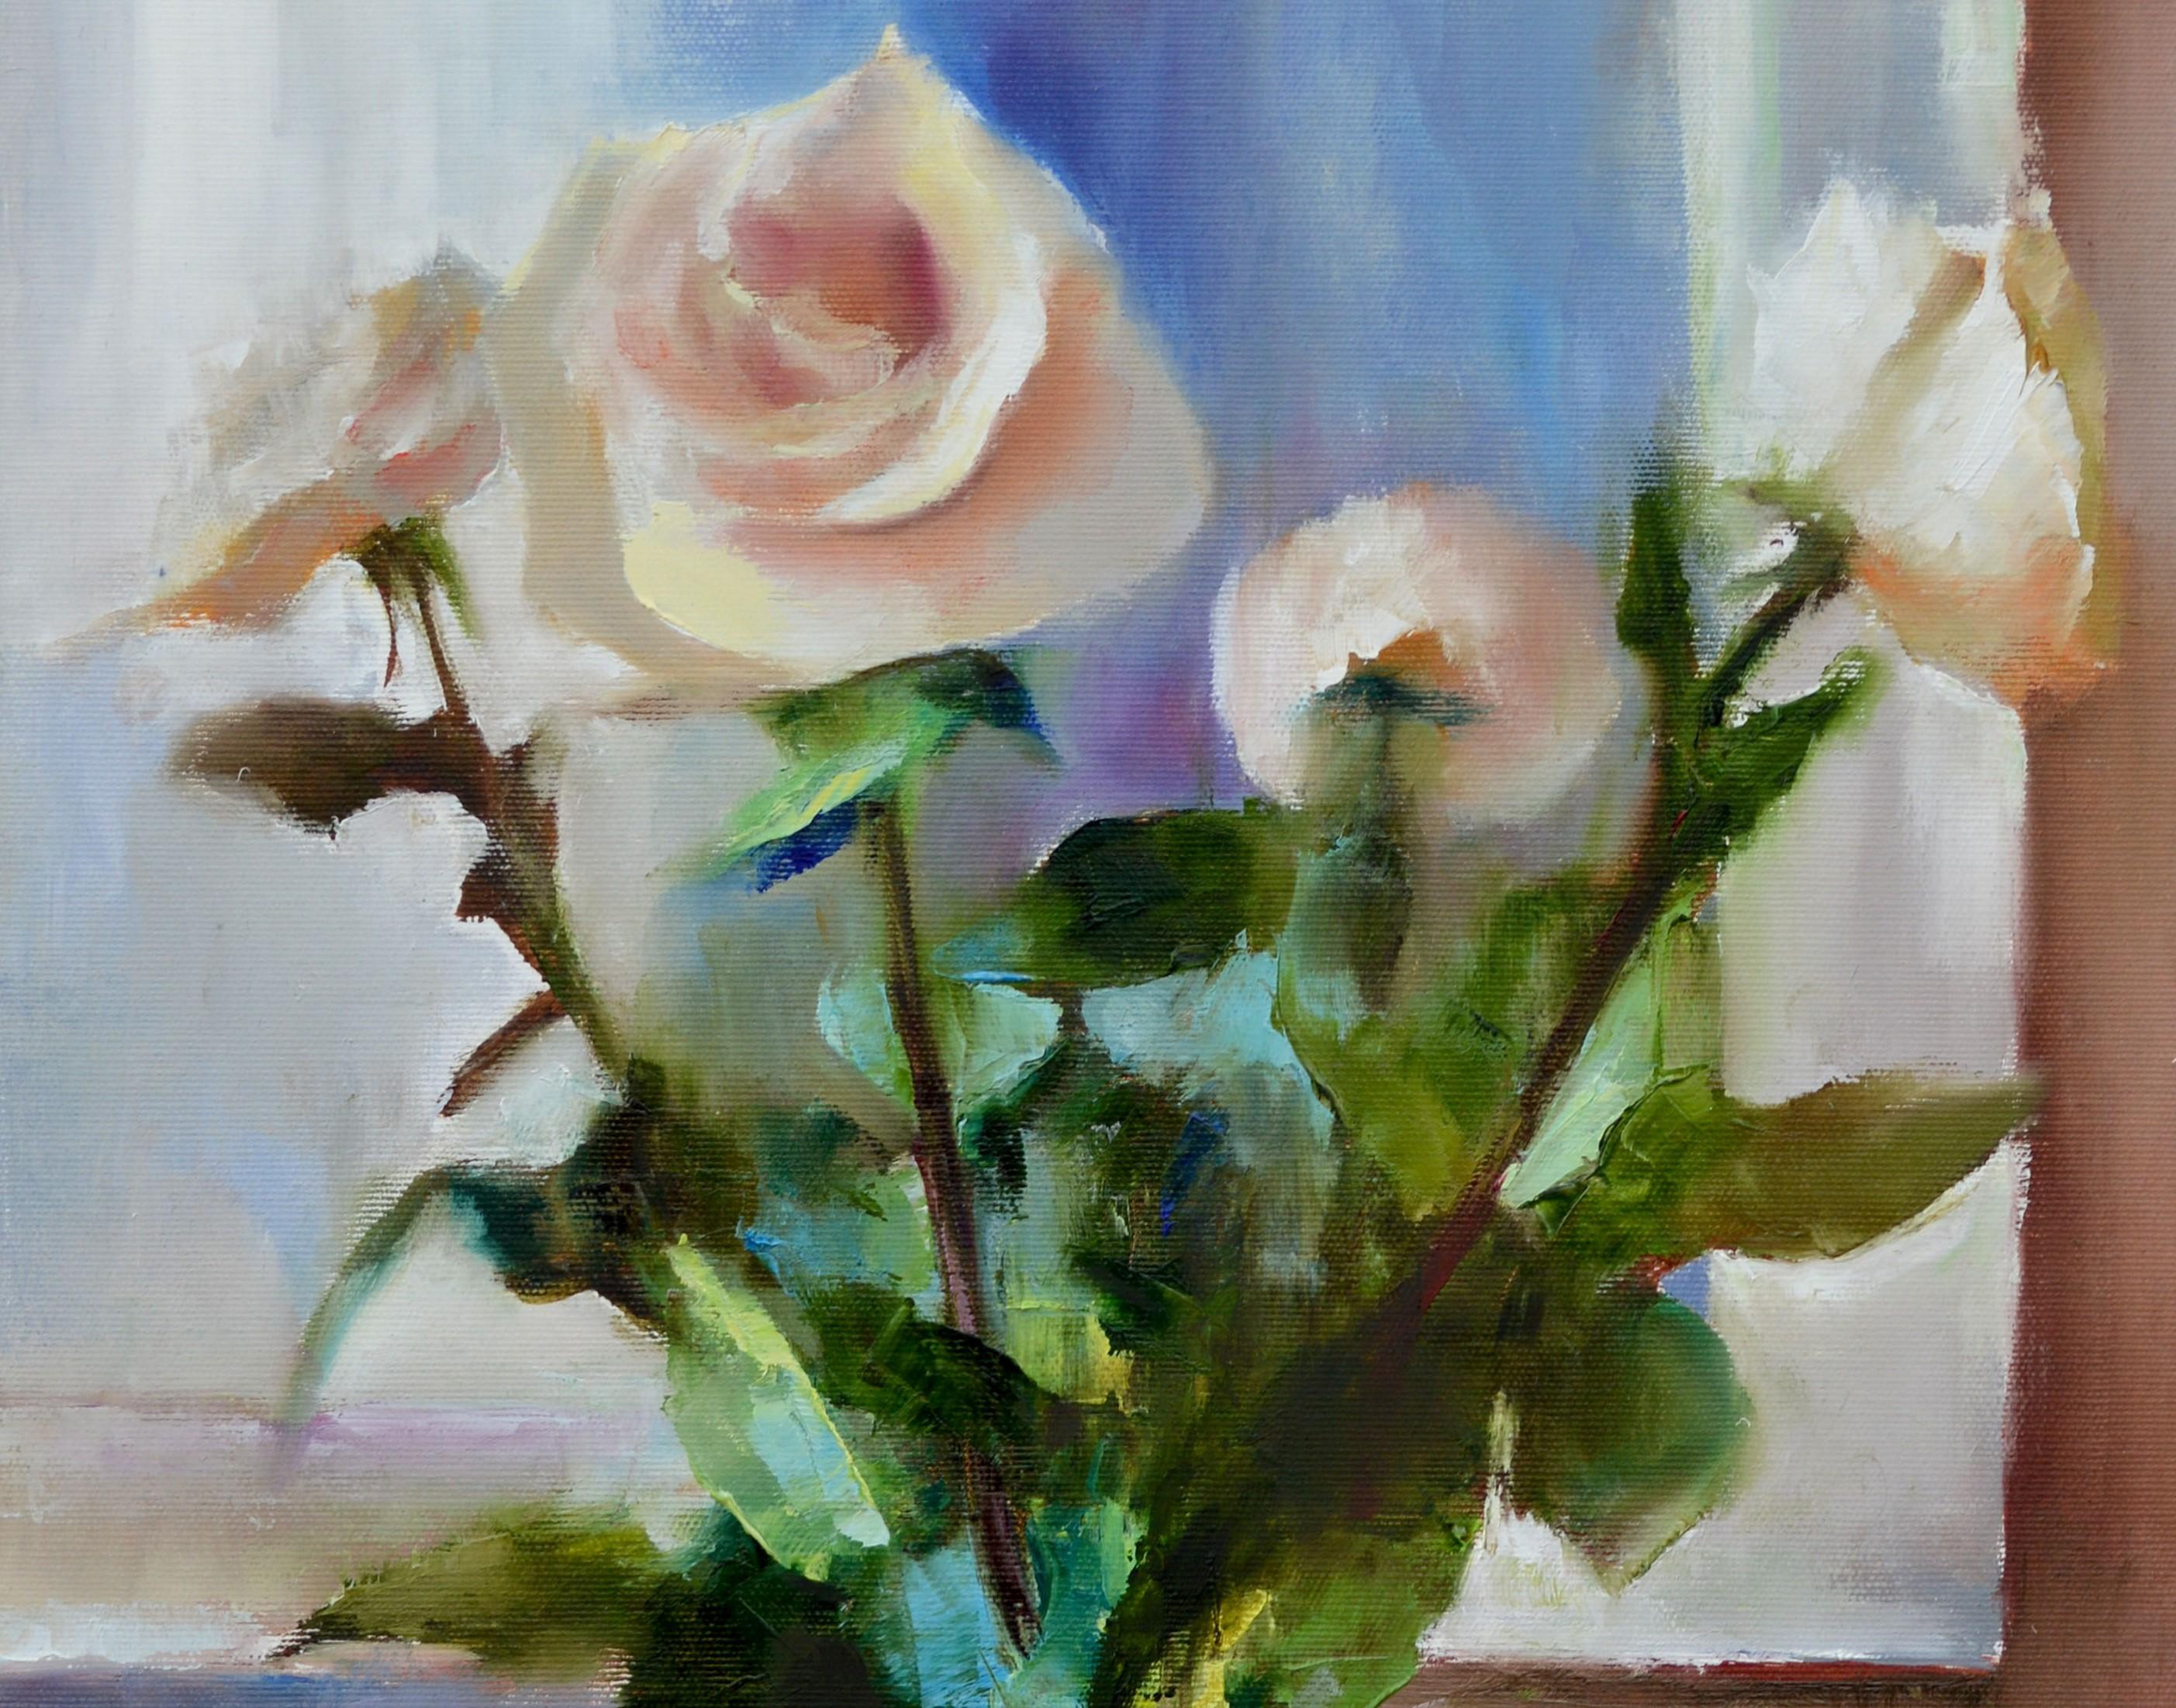 Roses - Painting by Elena Lukina